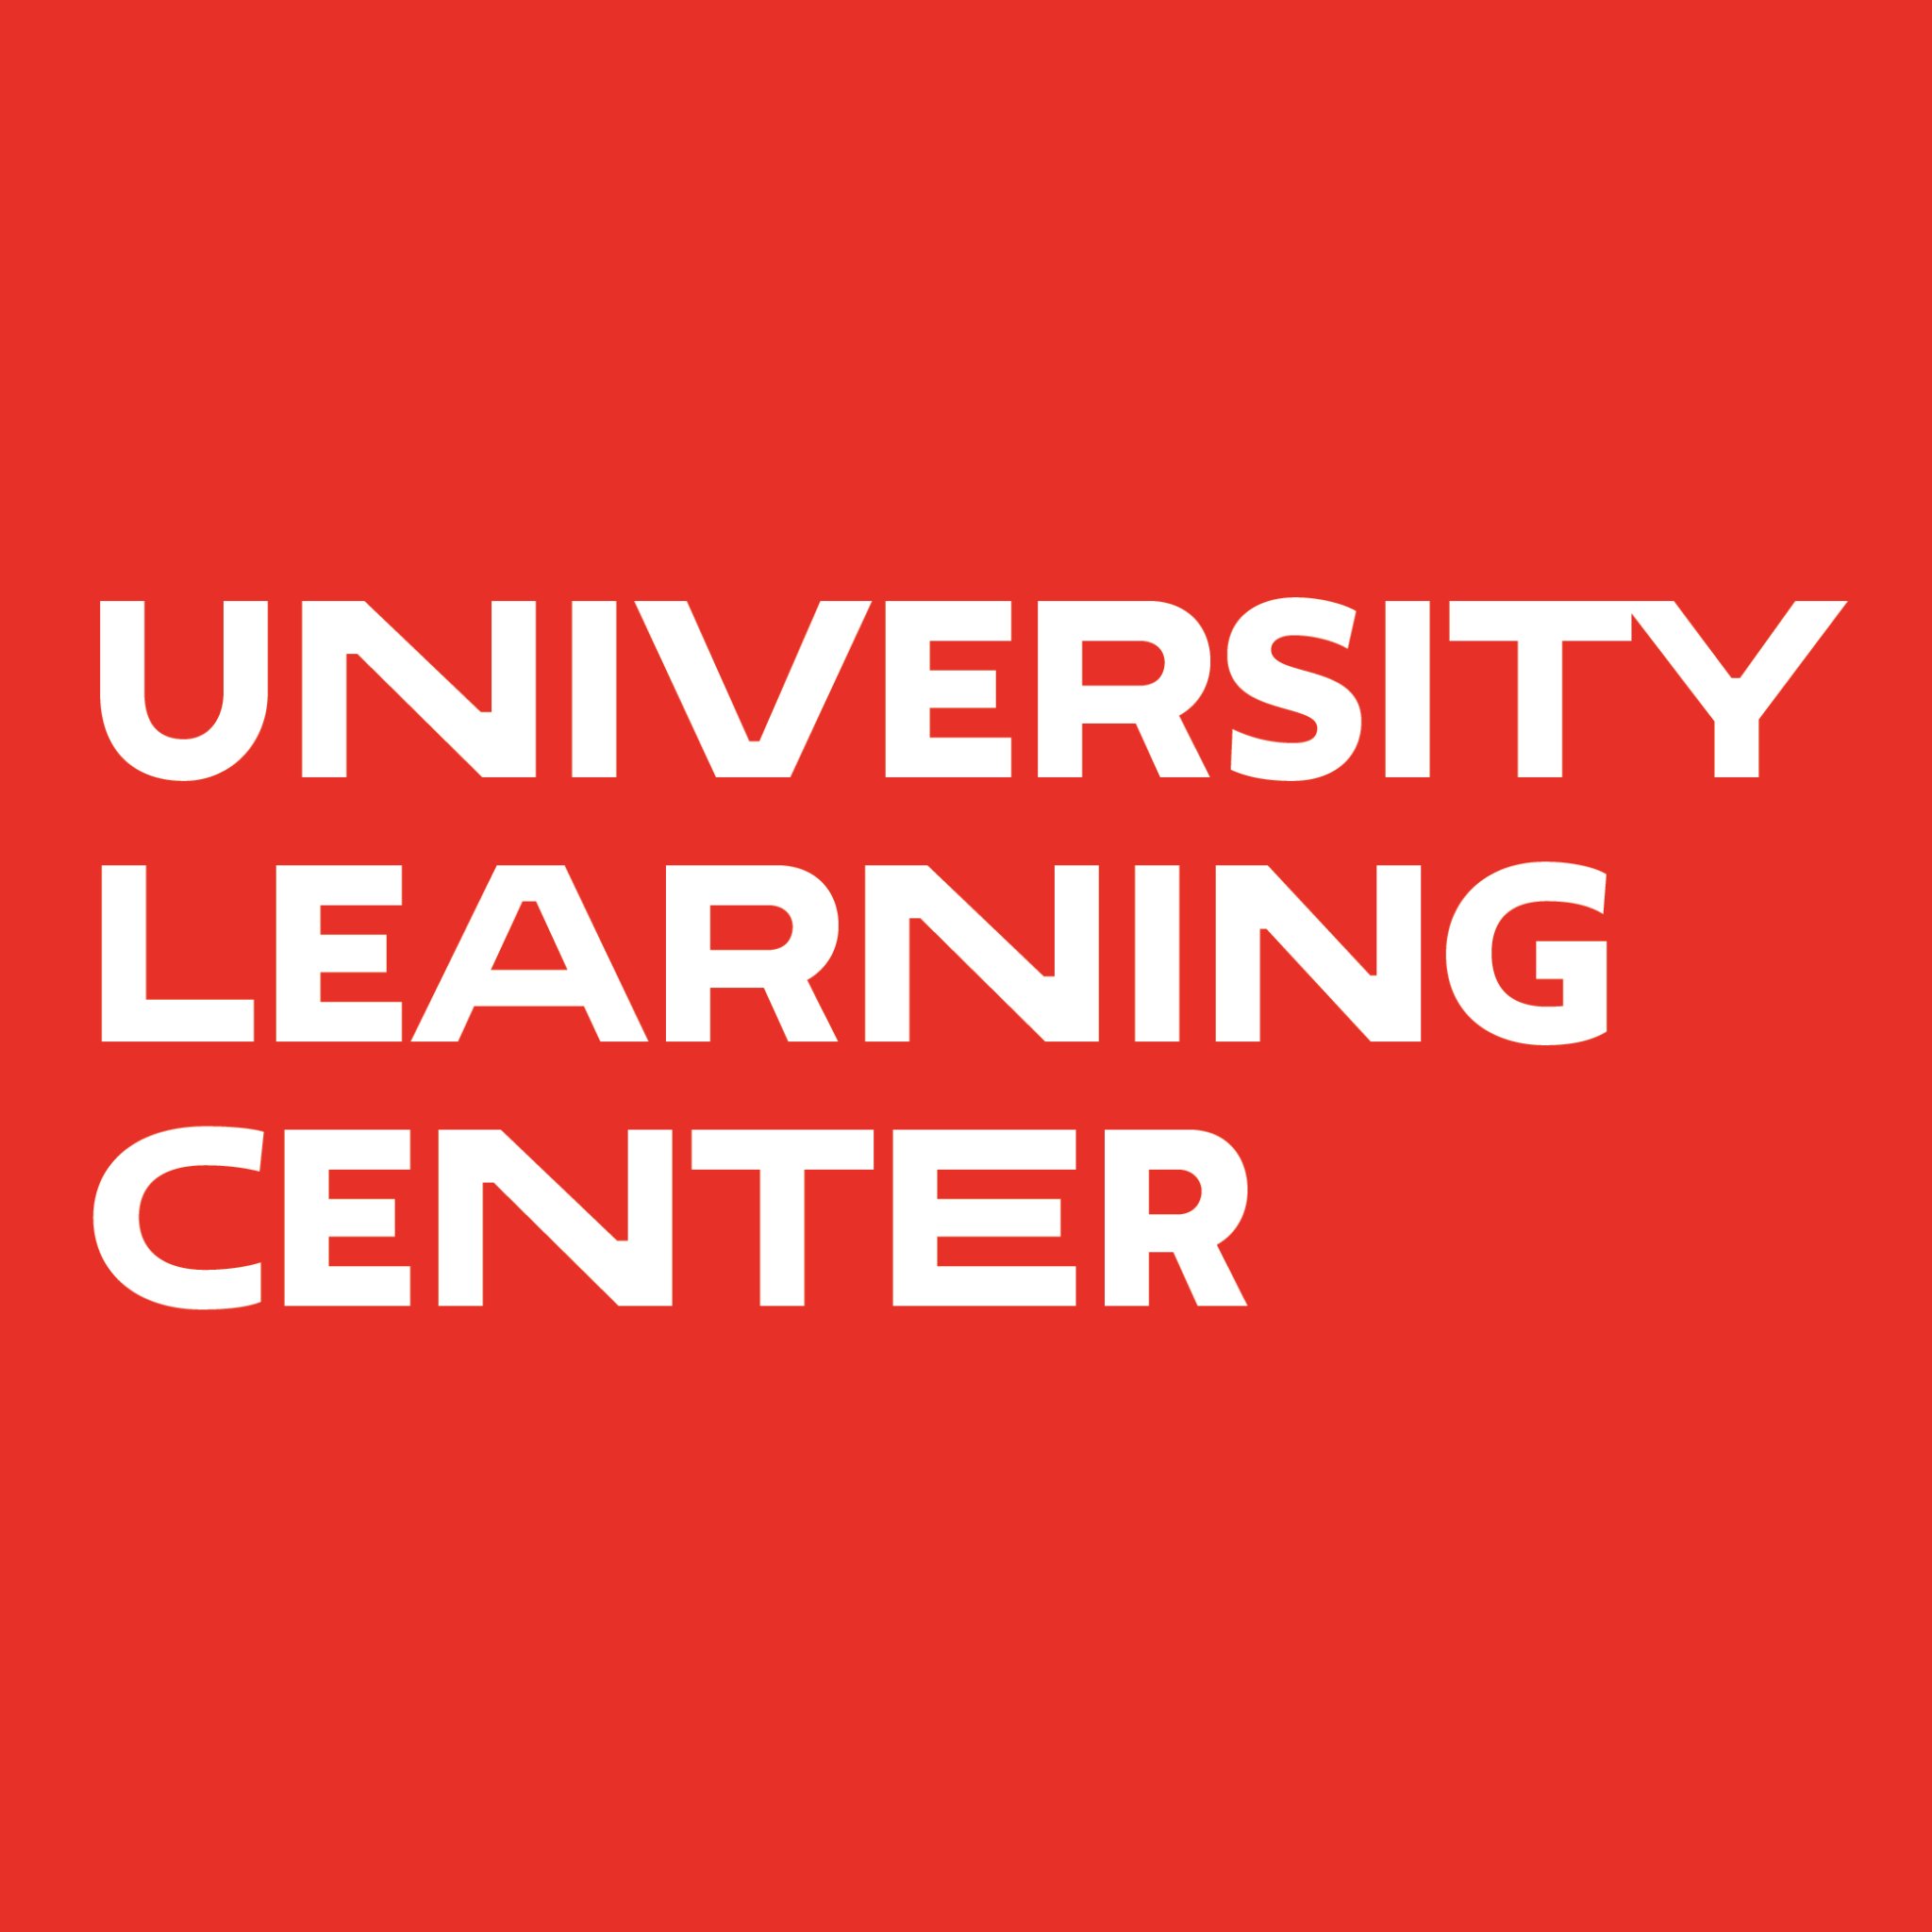 We are the University Learning Center @TheNewSchool! We offer free tutoring for all students and alums. Email us: learningcenter@newschool.edu